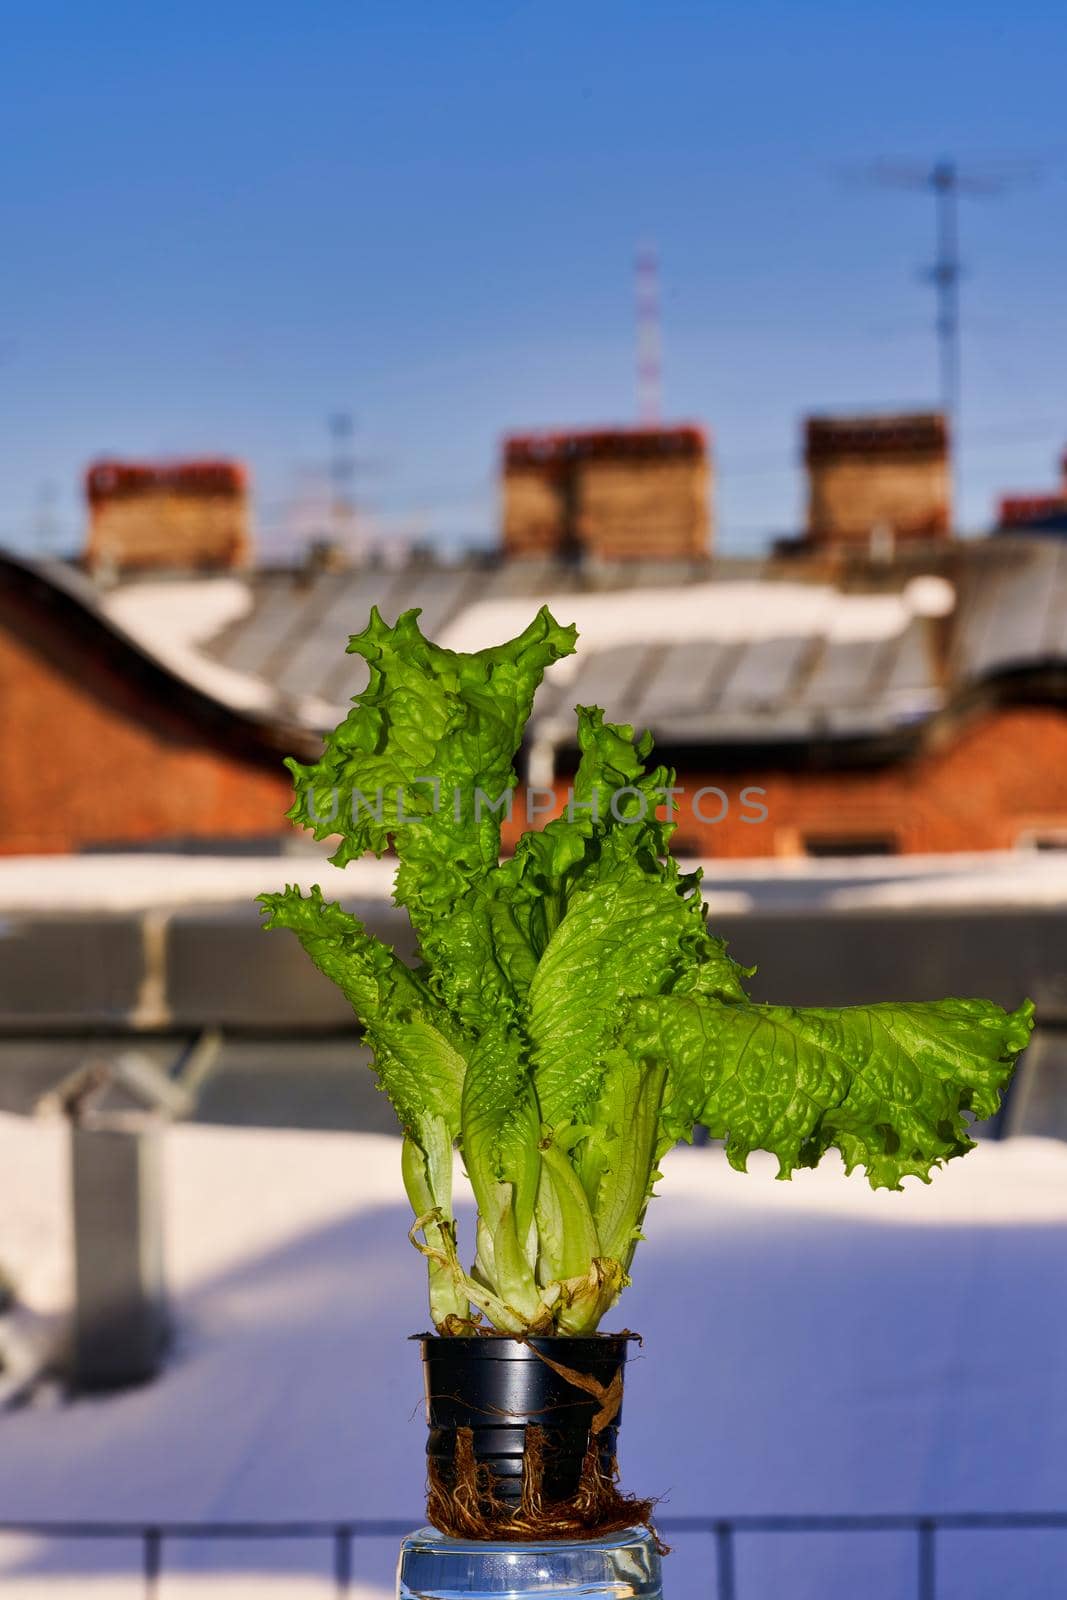 Green lettuce is grown in the winter at home on the windowsill by vizland